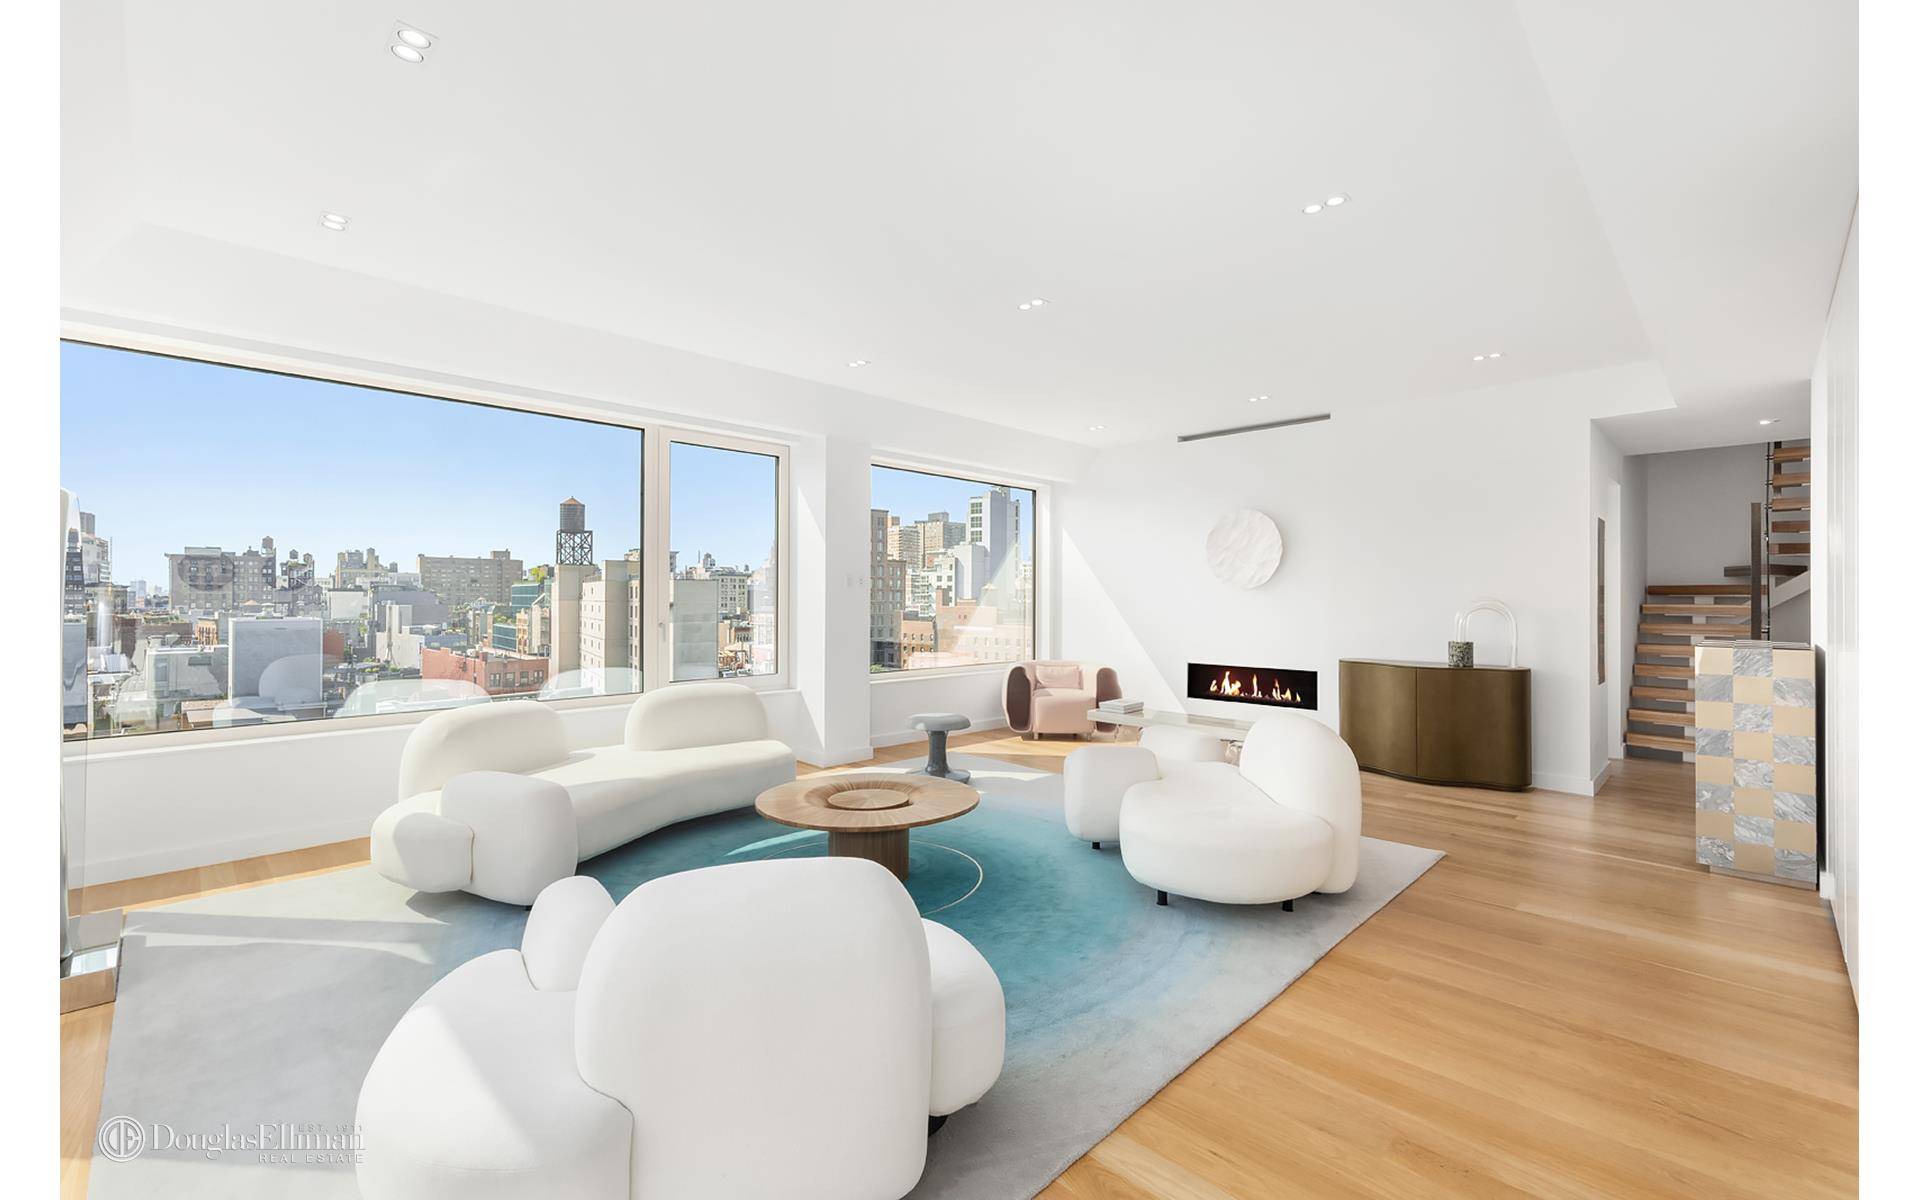 IMMEDIATE OCCUPANCY NOW OFFERING PRIVATE IN PERSON SHOWINGS BY APPOINTMENT Located at the nexus of Noho, the East Village and the Lower East Side, 32 East 1st Street has been ...